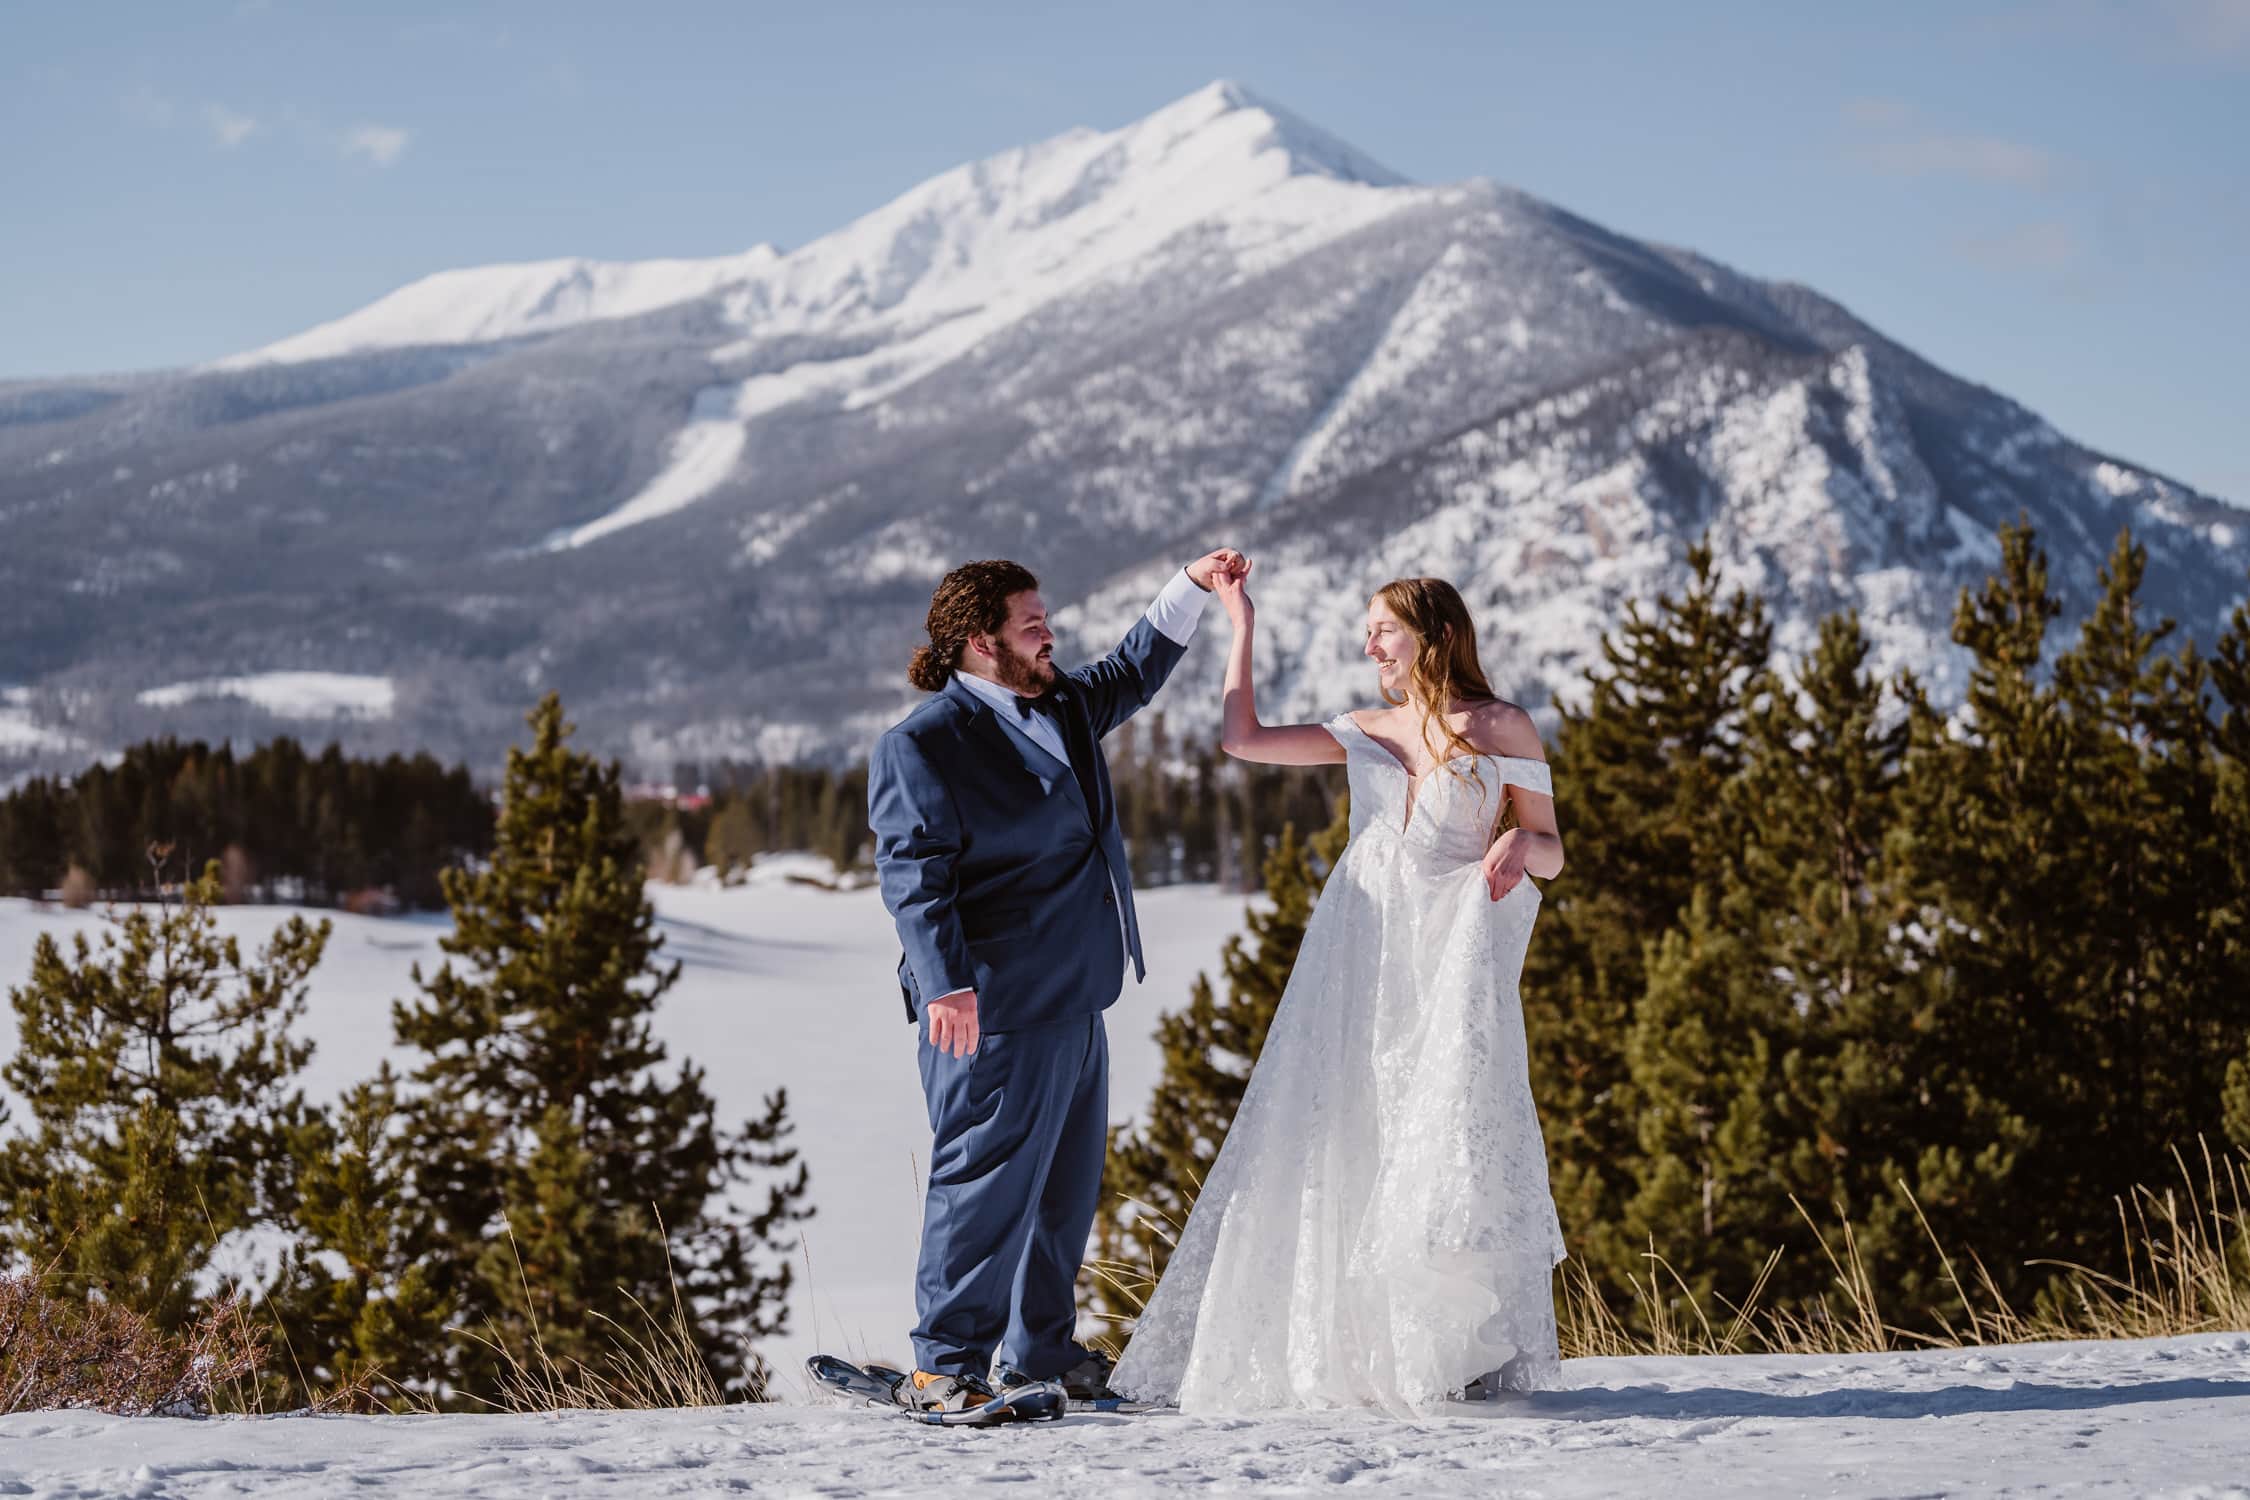 A couple sharing a first dance in the snow during their Breckenridge elopement.